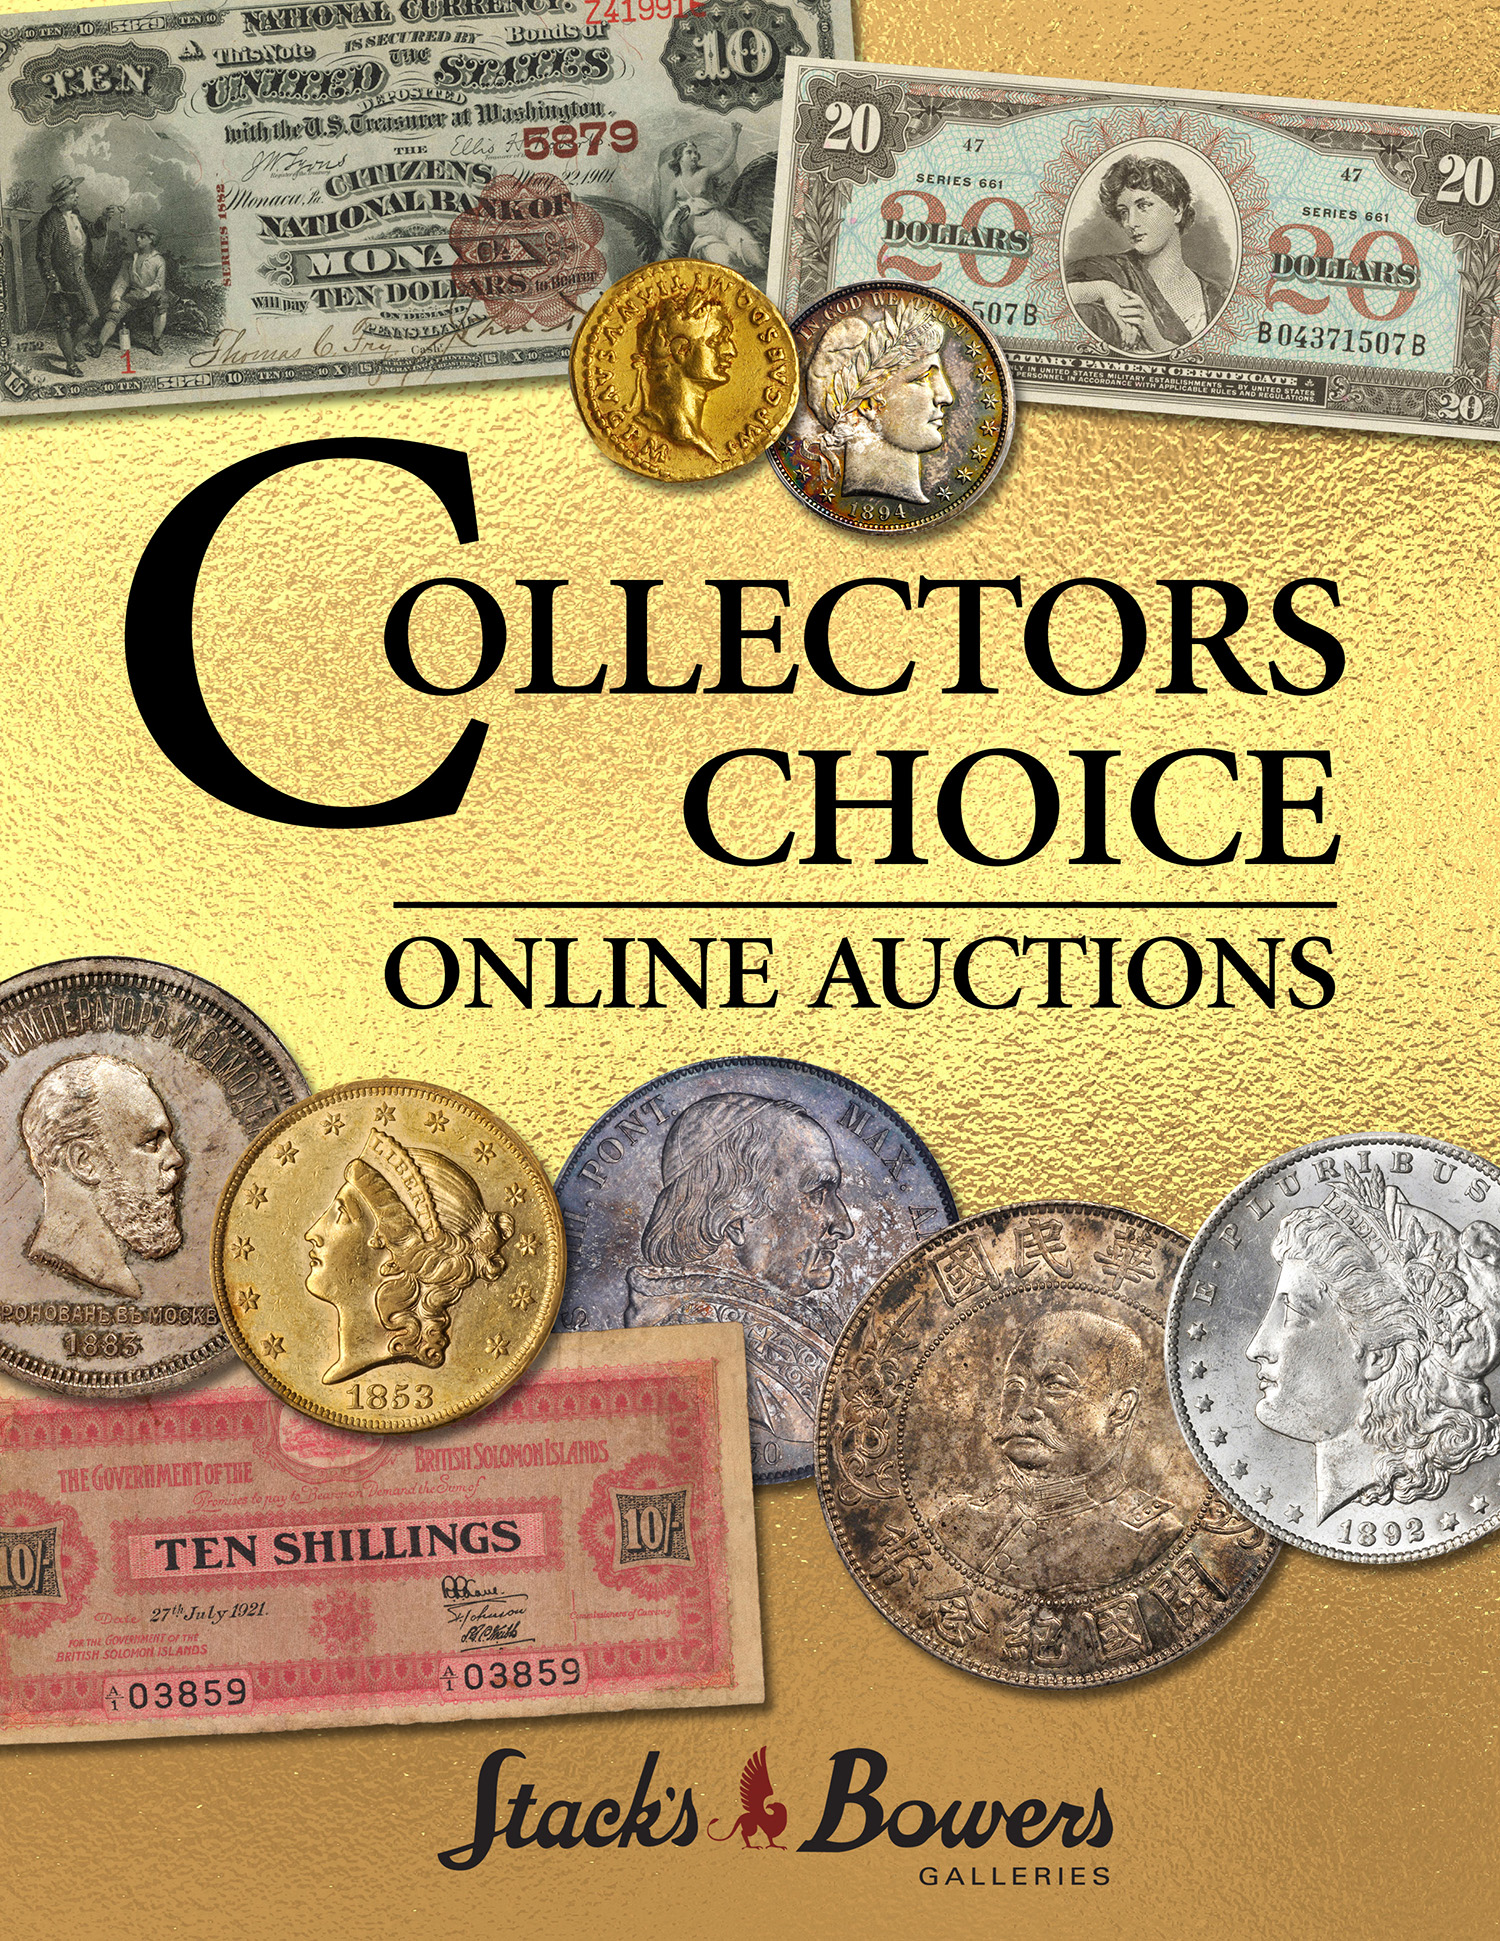 The September 2022 U.S. Collectors Choice Online Auction